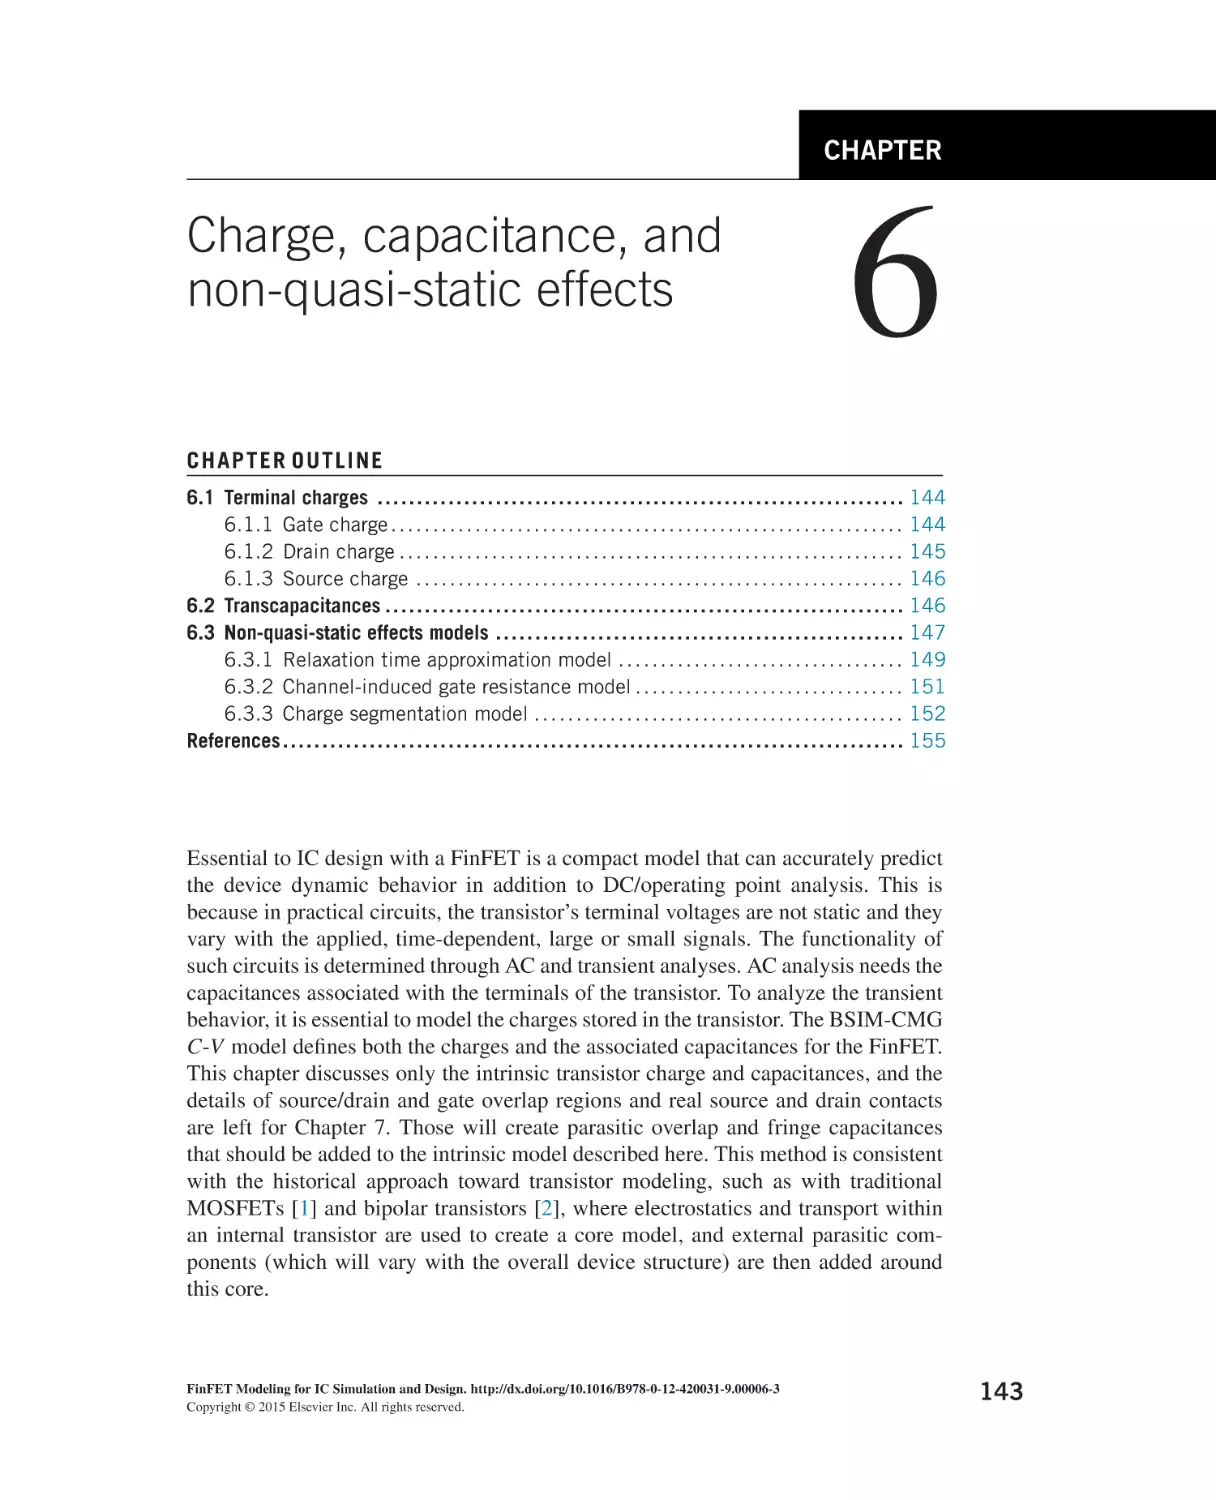 Charge, capacitance, and non-quasi-static effects